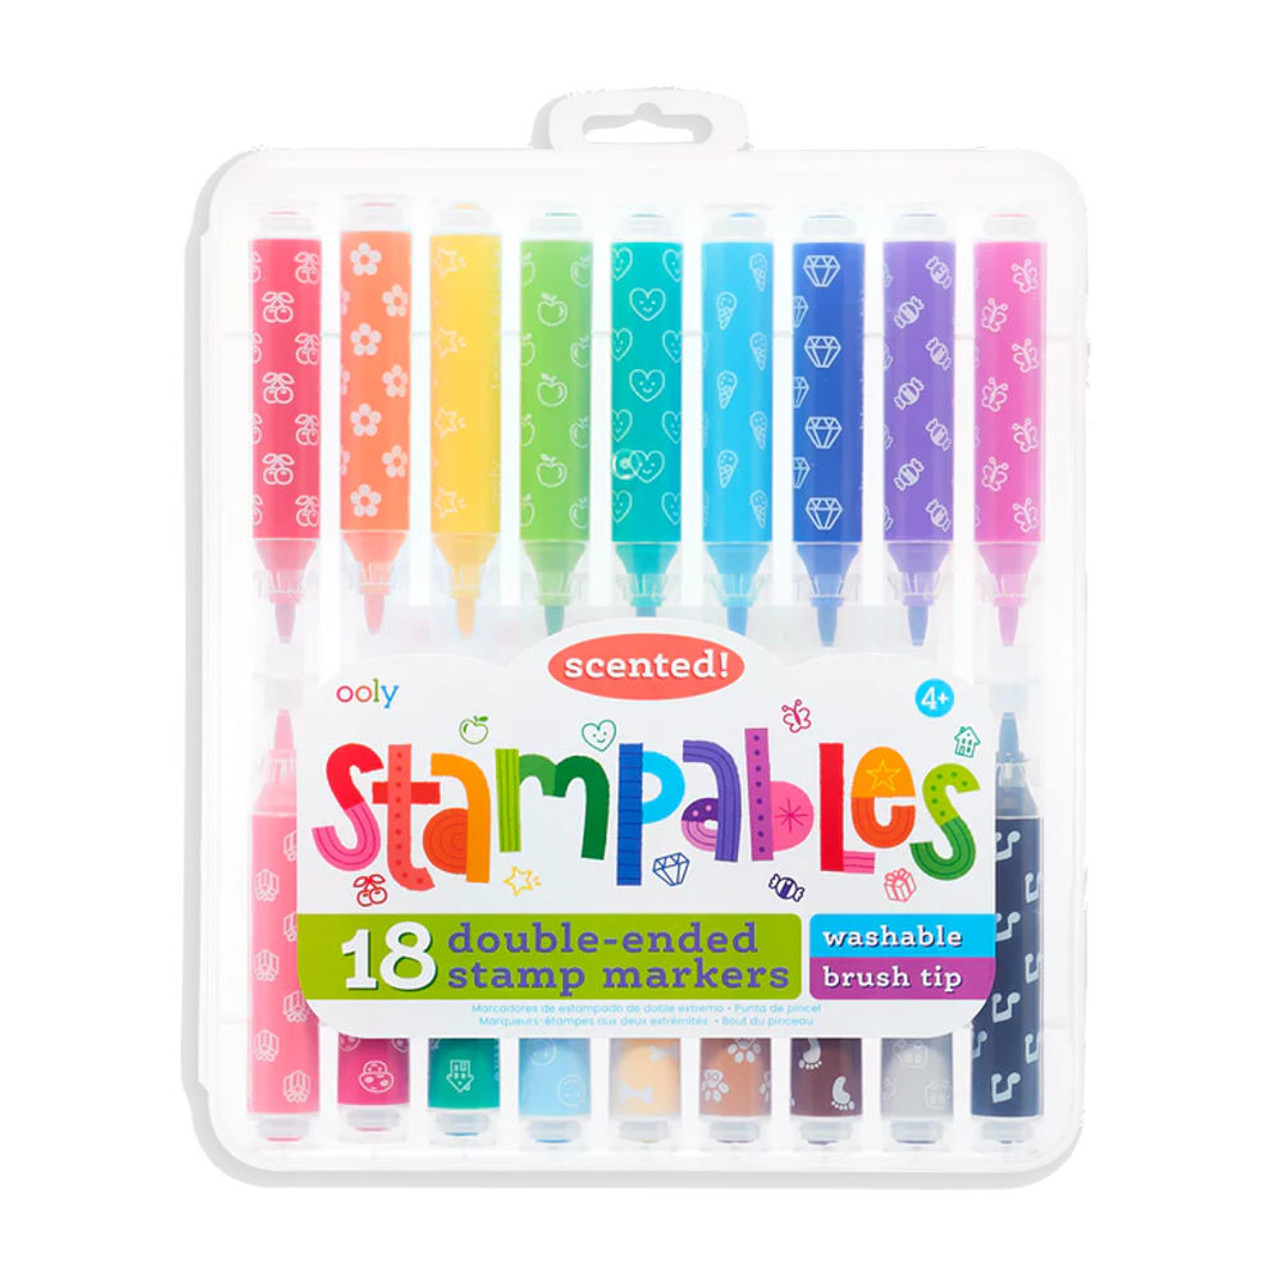 Scentco Washable Smarkers 14-Pack